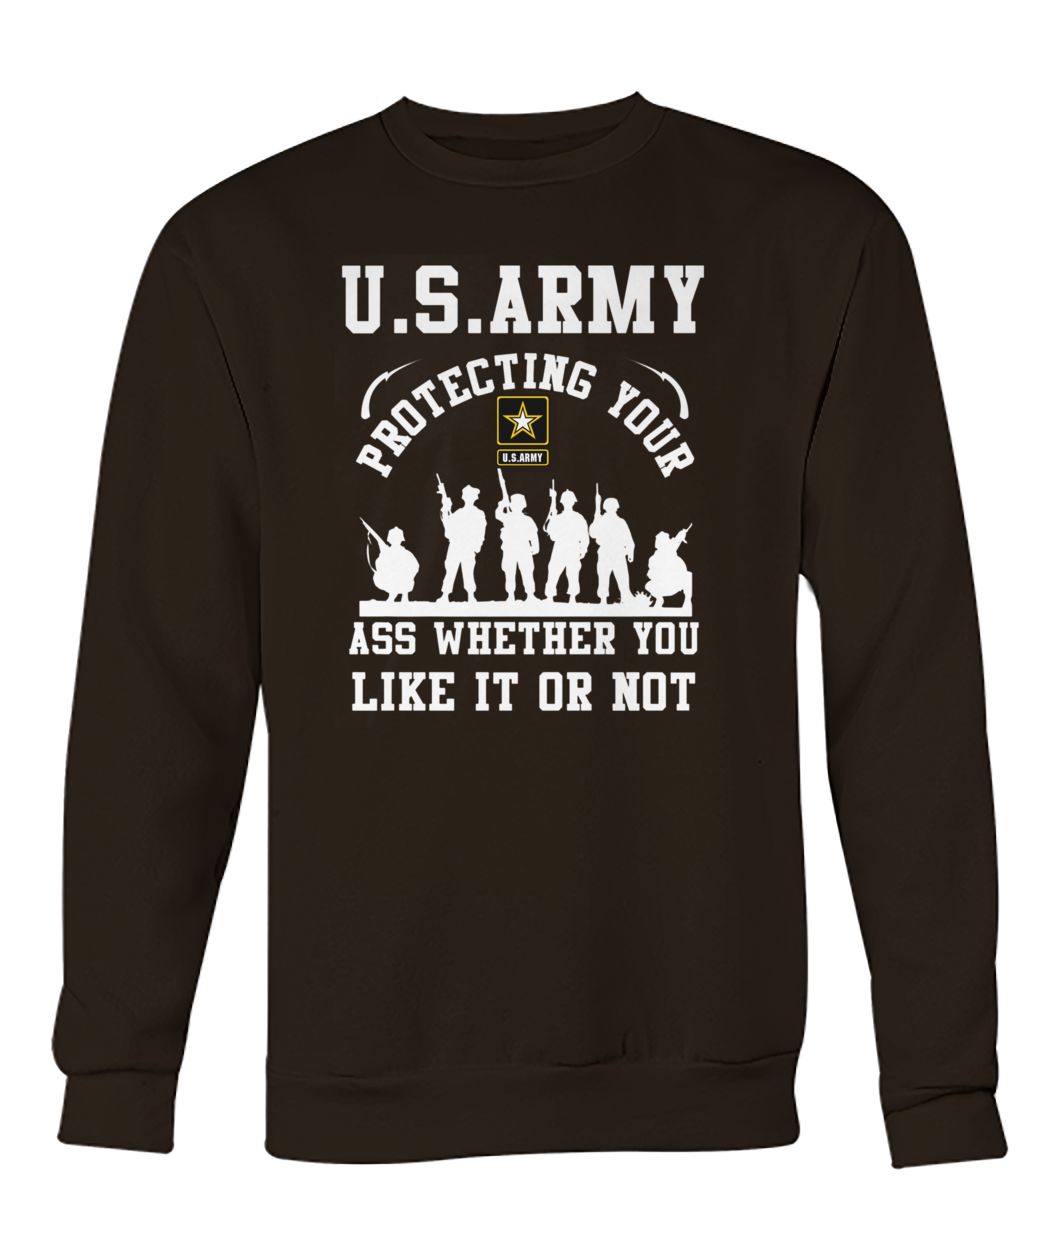 U.S.Army protecting your ass whether you like it or not crew neck sweatshirt